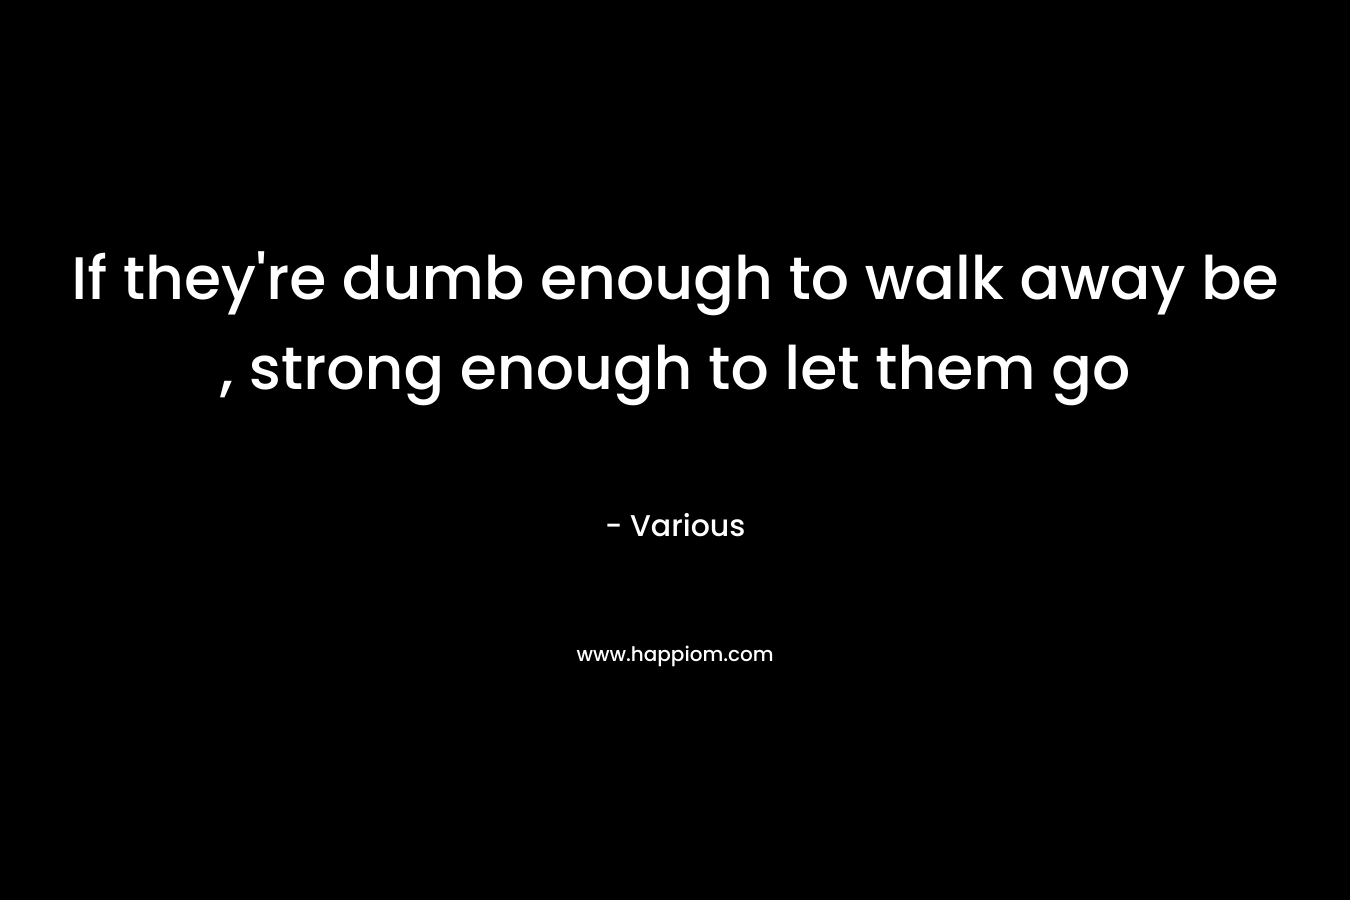 If they're dumb enough to walk away be , strong enough to let them go